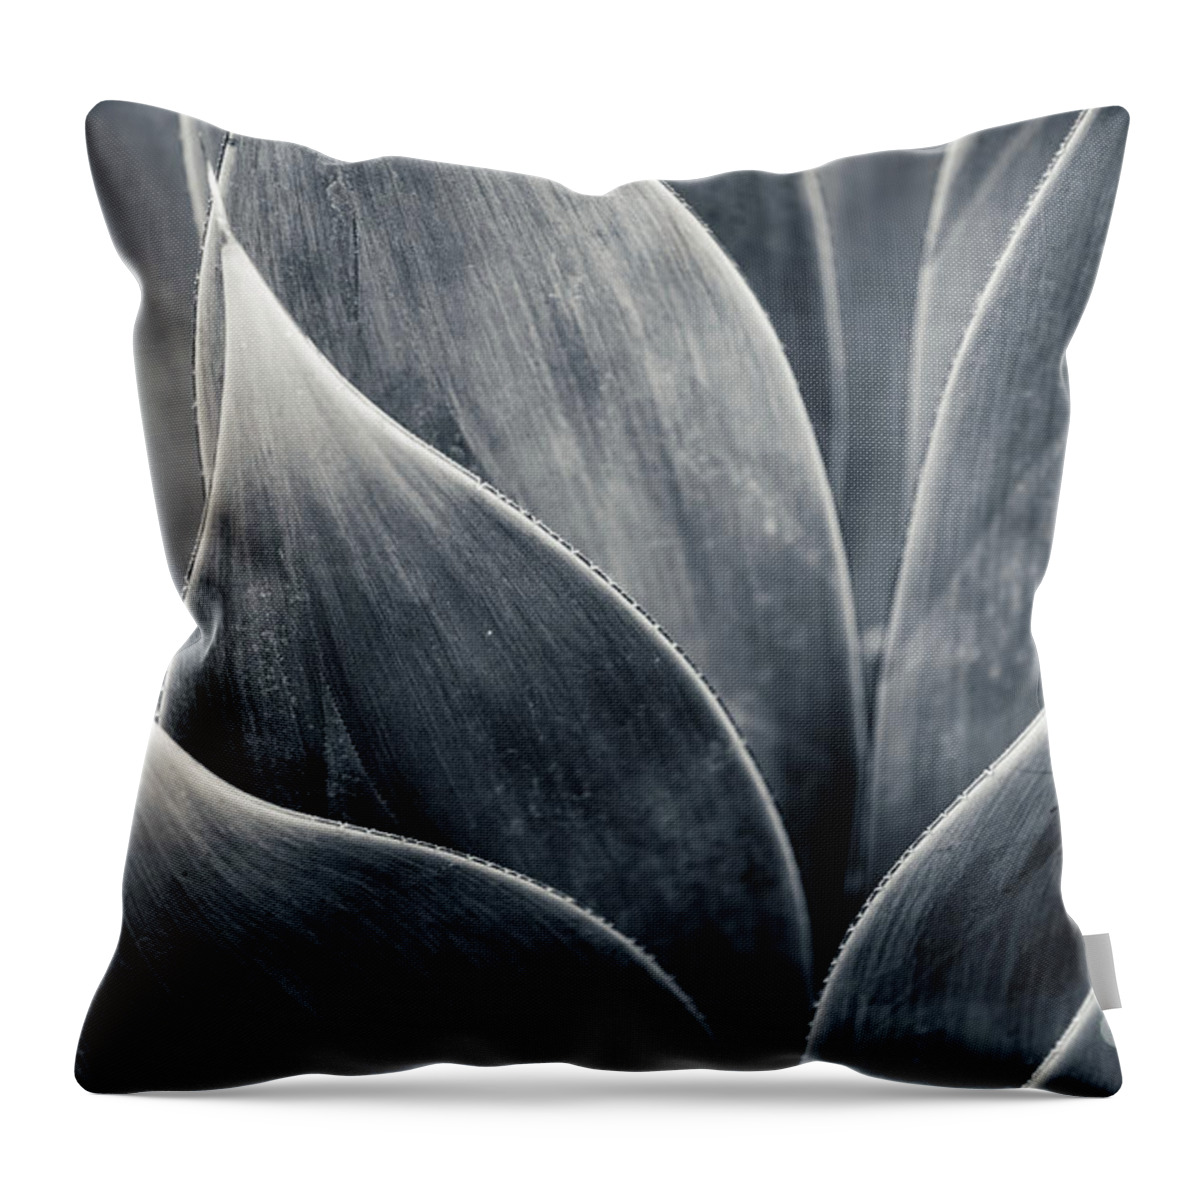 Agave Throw Pillow featuring the photograph Agave by Jennifer Magallon